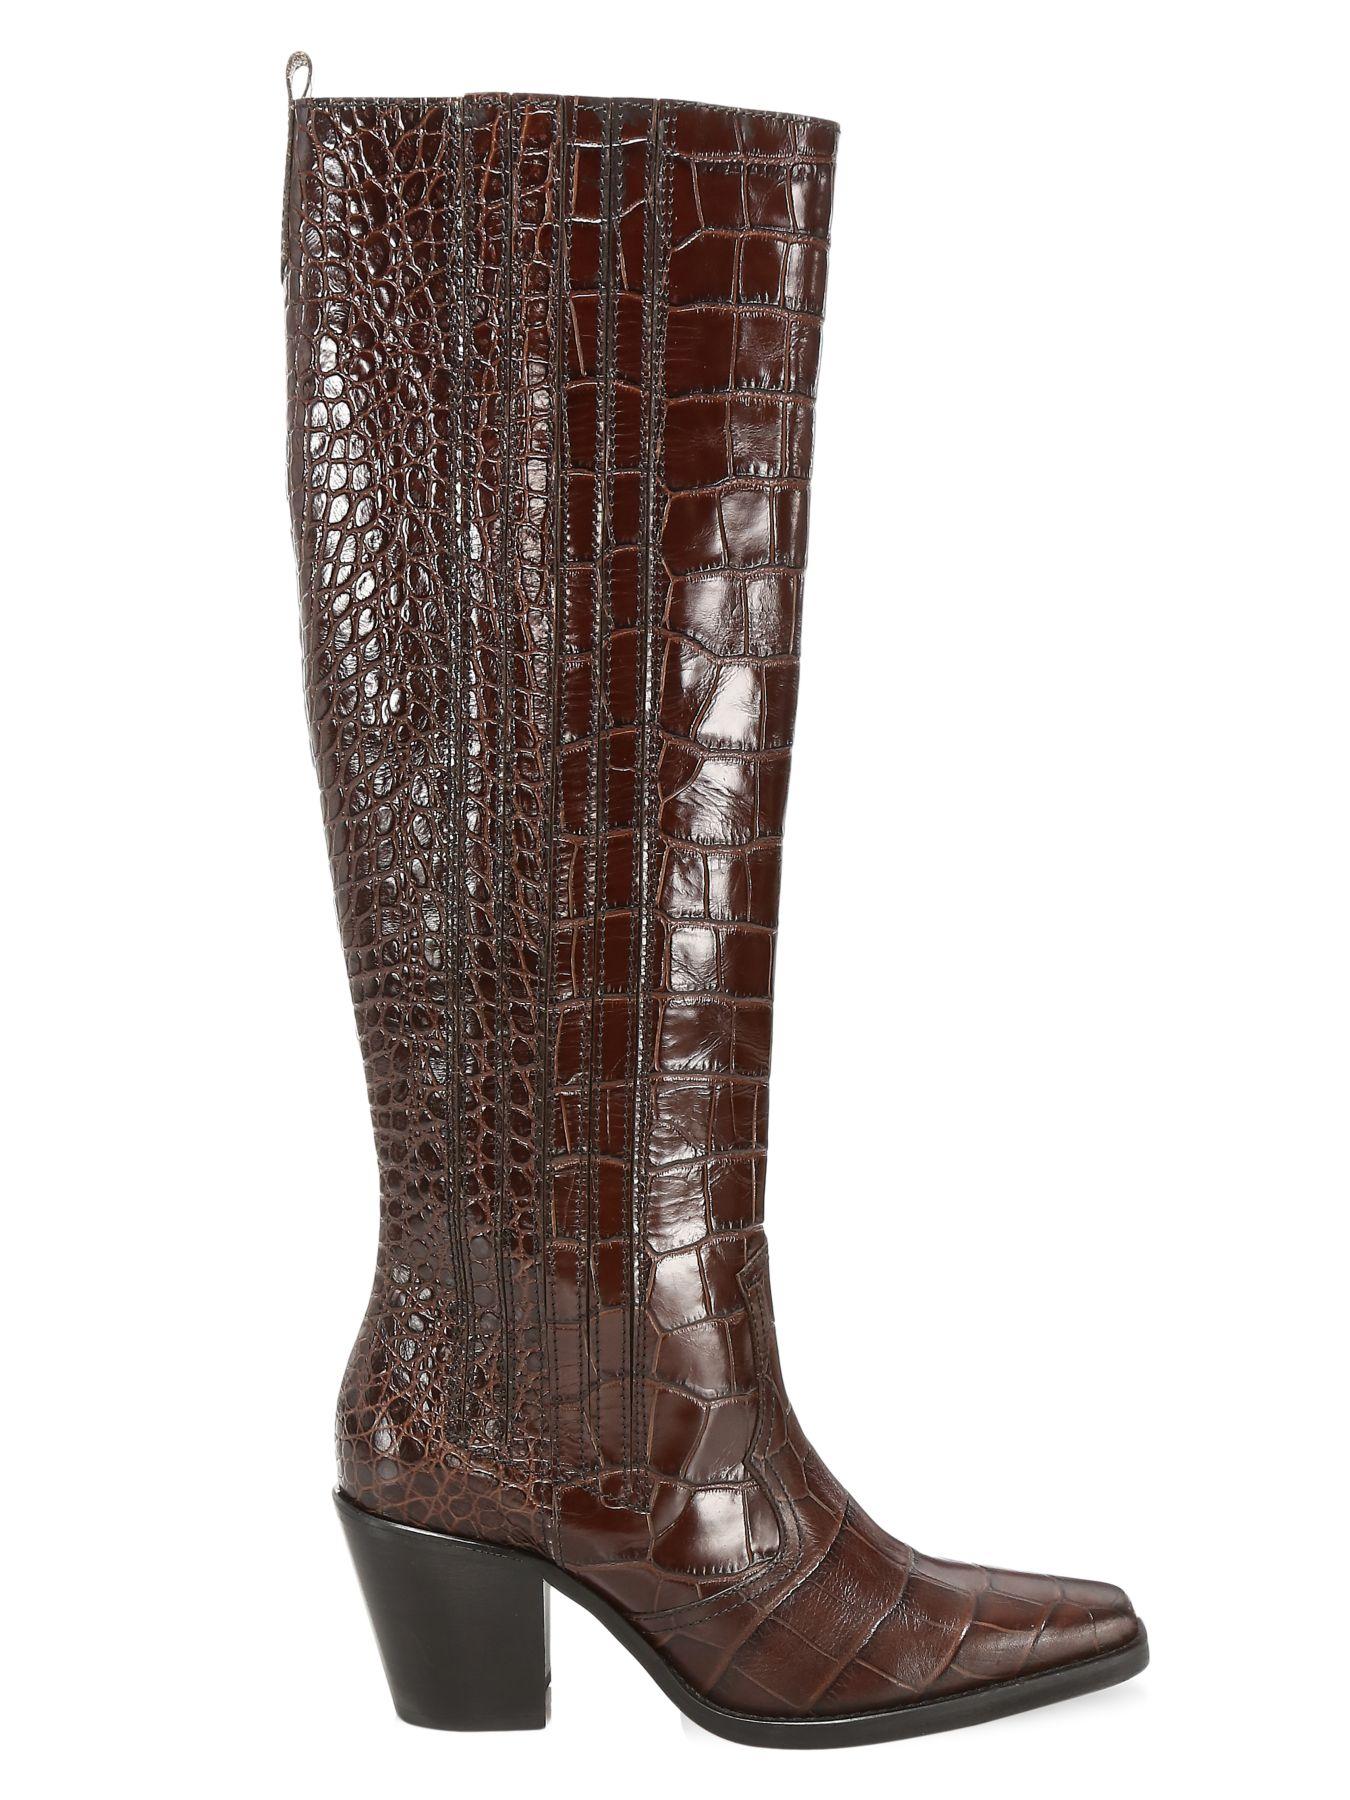 Ganni Leather Western Knee High Boots in Brown - Save 56% - Lyst